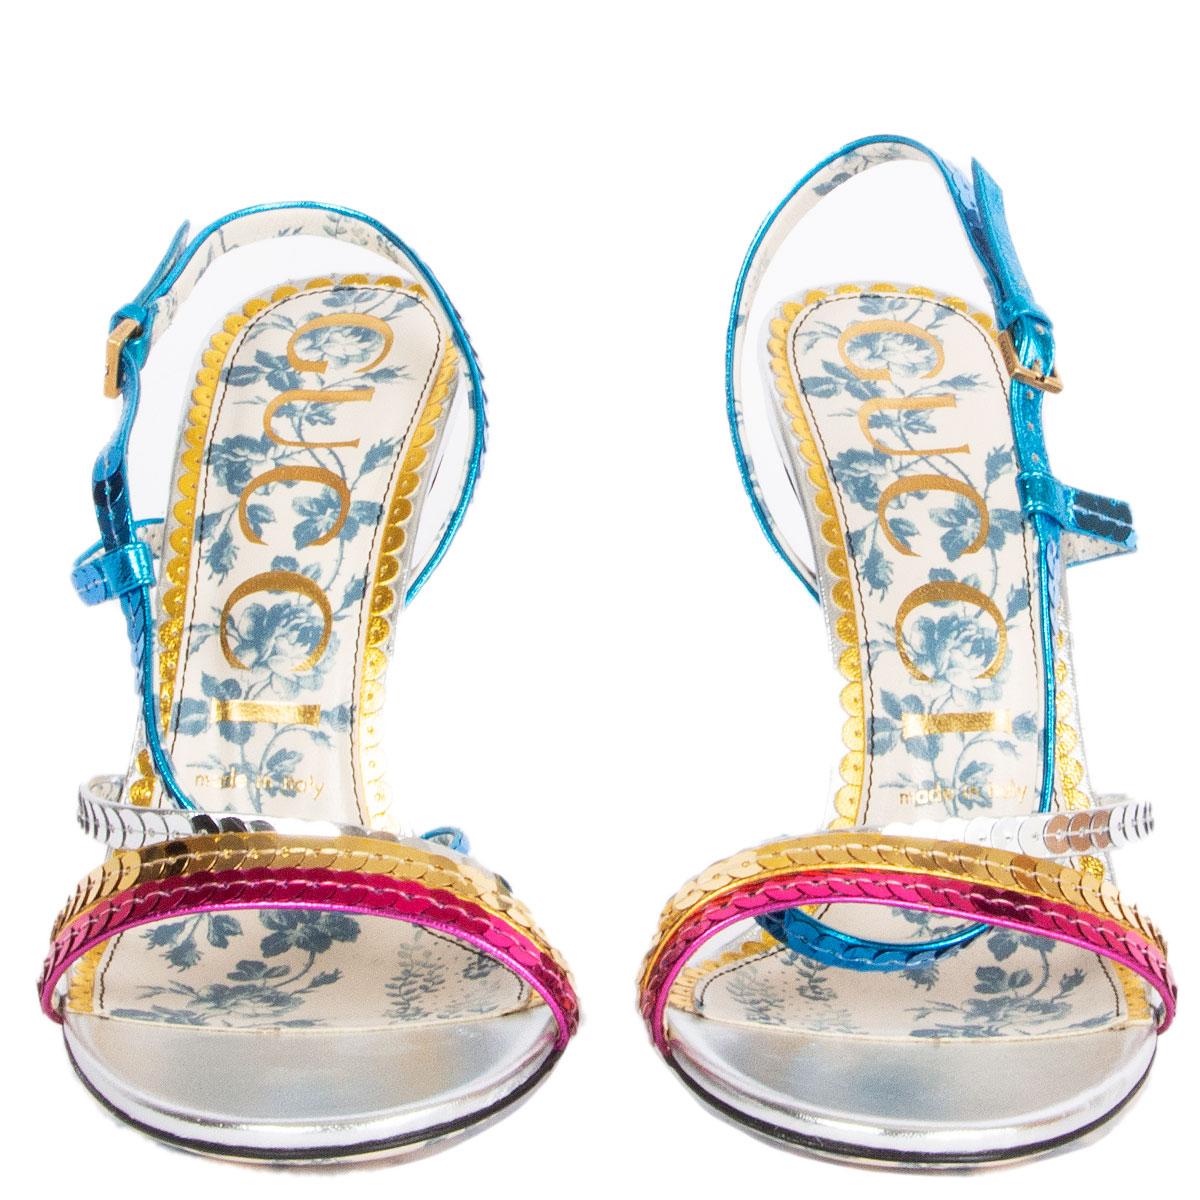 100% authentic Gucci Haines 105 sandals in metallic silver leather with pink, gold, silver and blue metallic sequin embellished leather straps. Brand new. 

Imprinted Size 38
Shoe Size 38
Inside Sole 25cm (9.8in)
Width 7.5cm (2.9in)
Heel 11cm